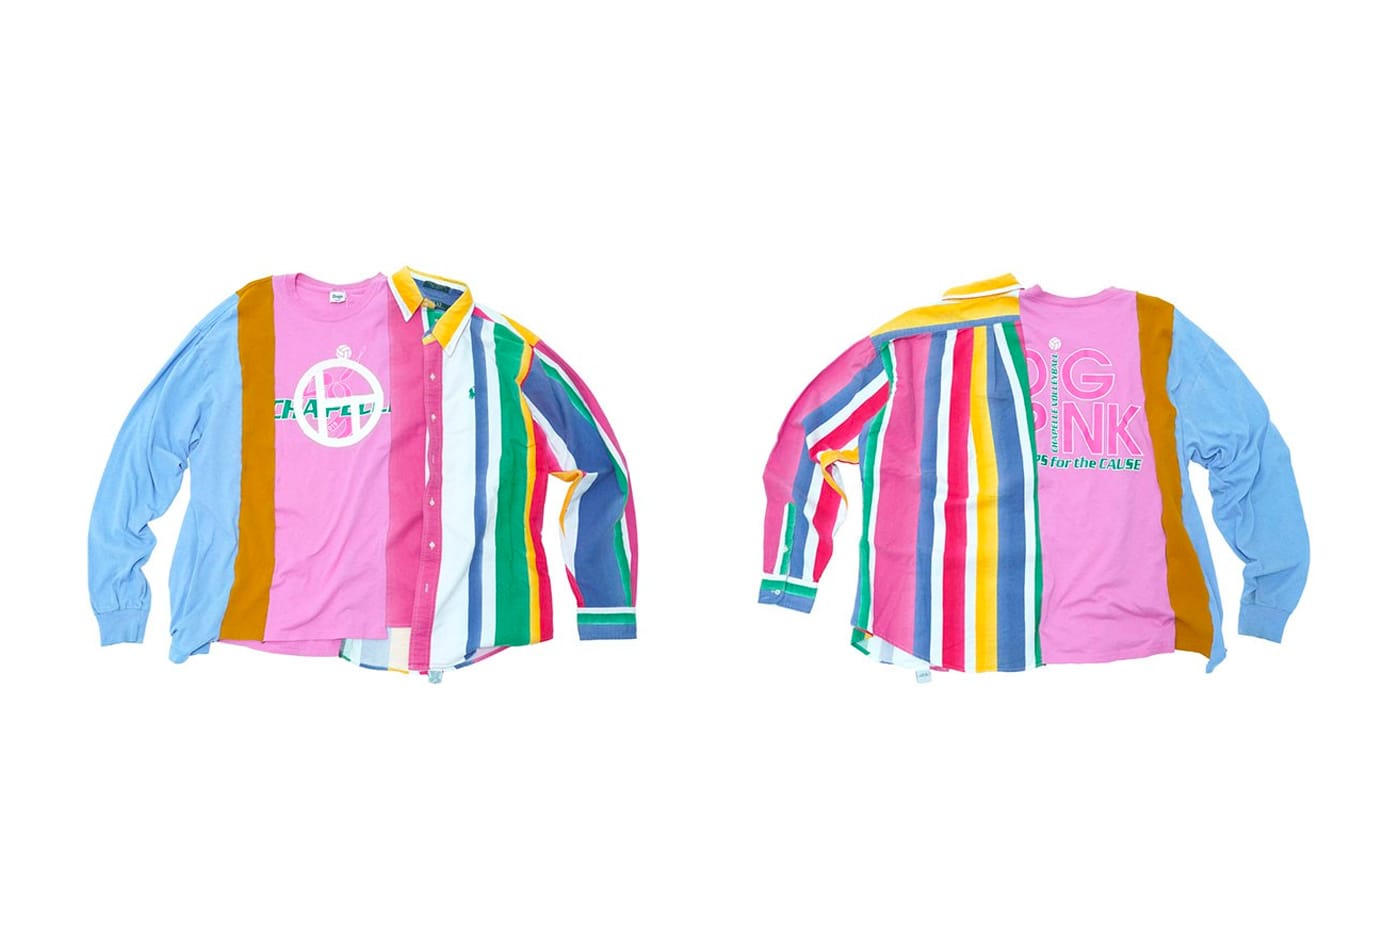 KOHH's Dogs Remake Drops Reworked Jackets & Shirts | Hypebeast